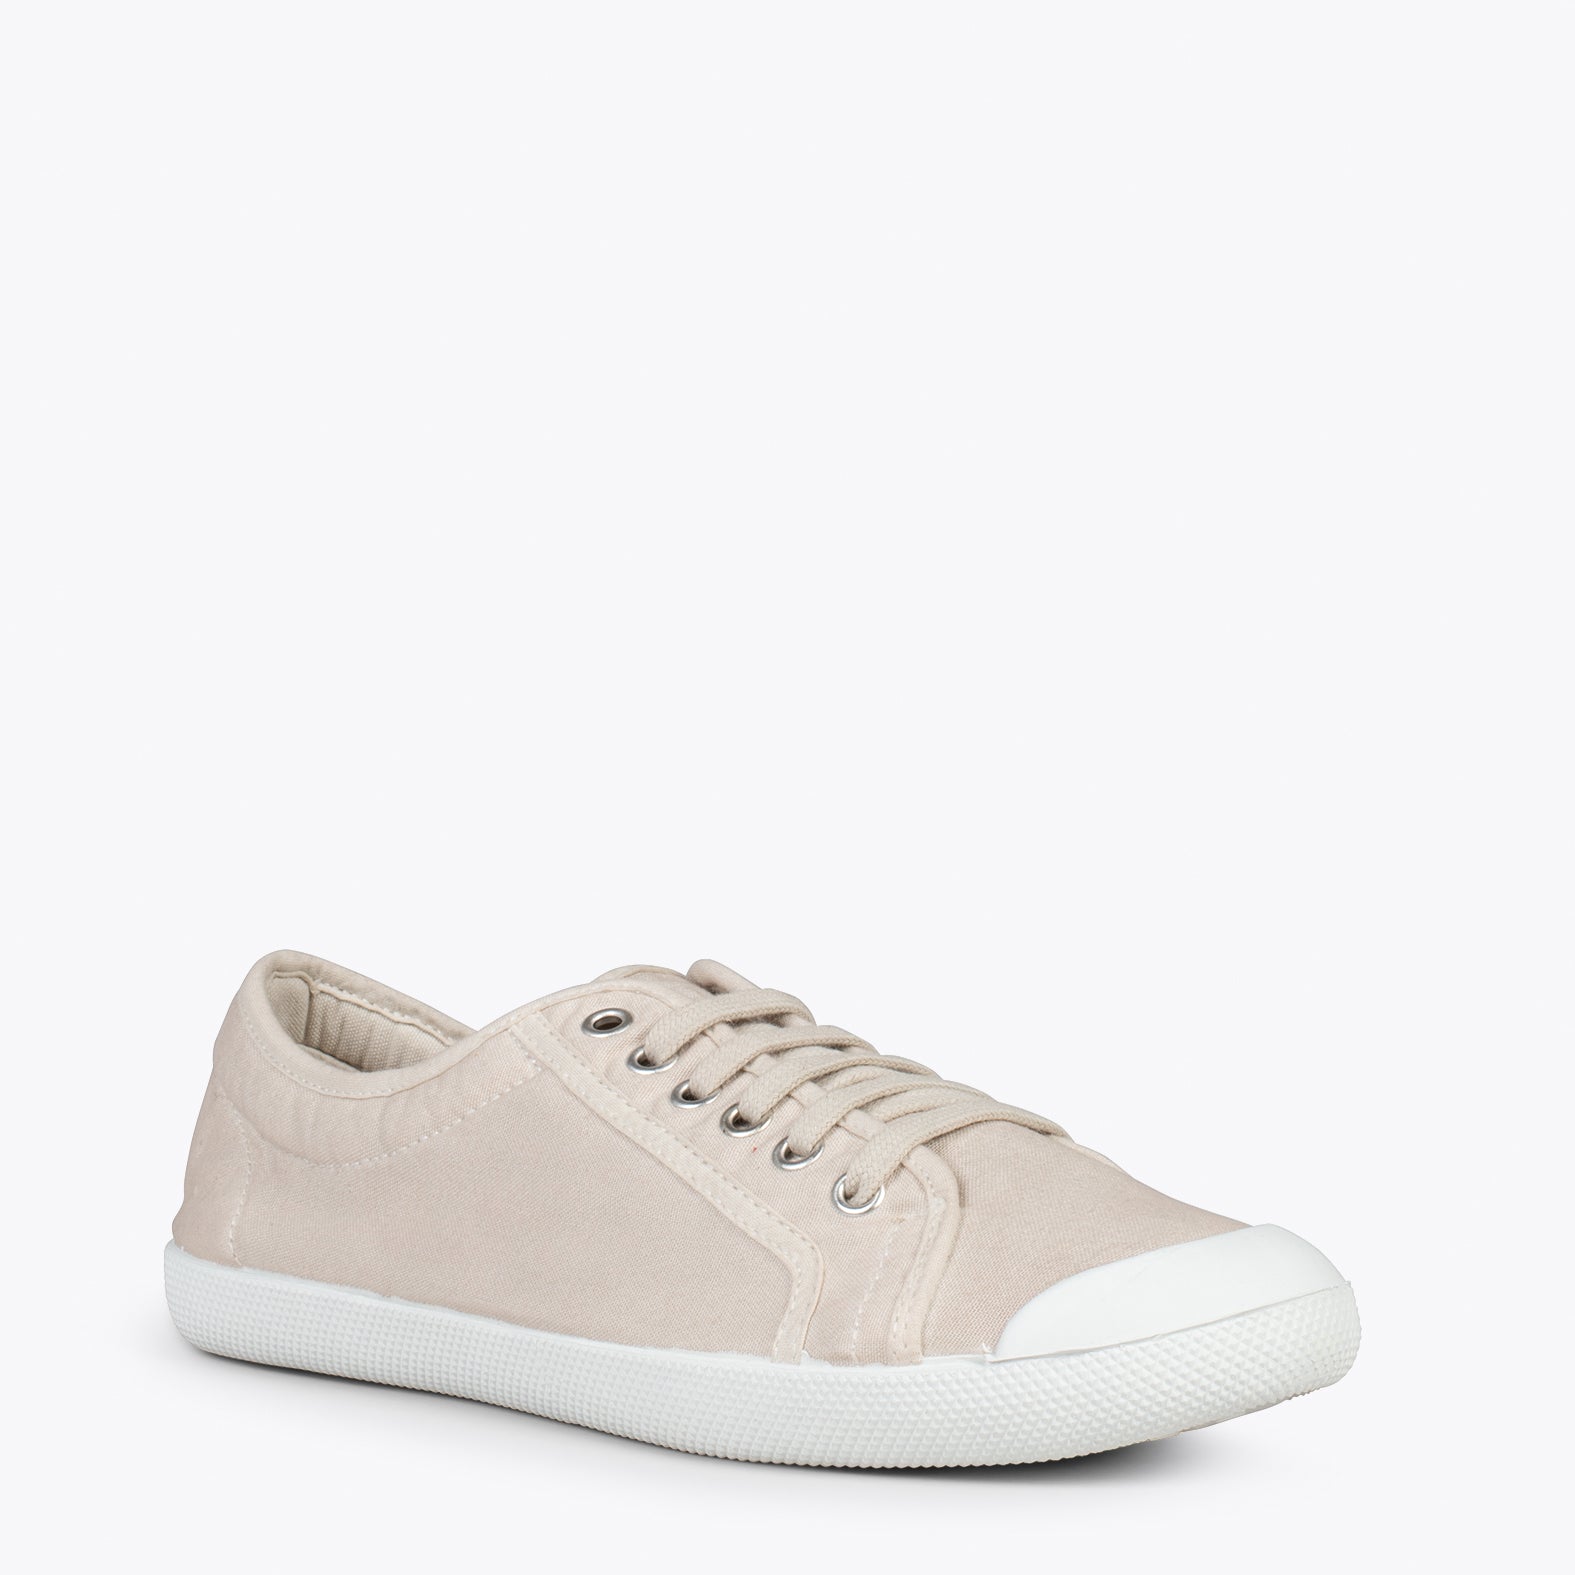 BAOBAB – BEIGE BCI cotton sneakers from IO&GO